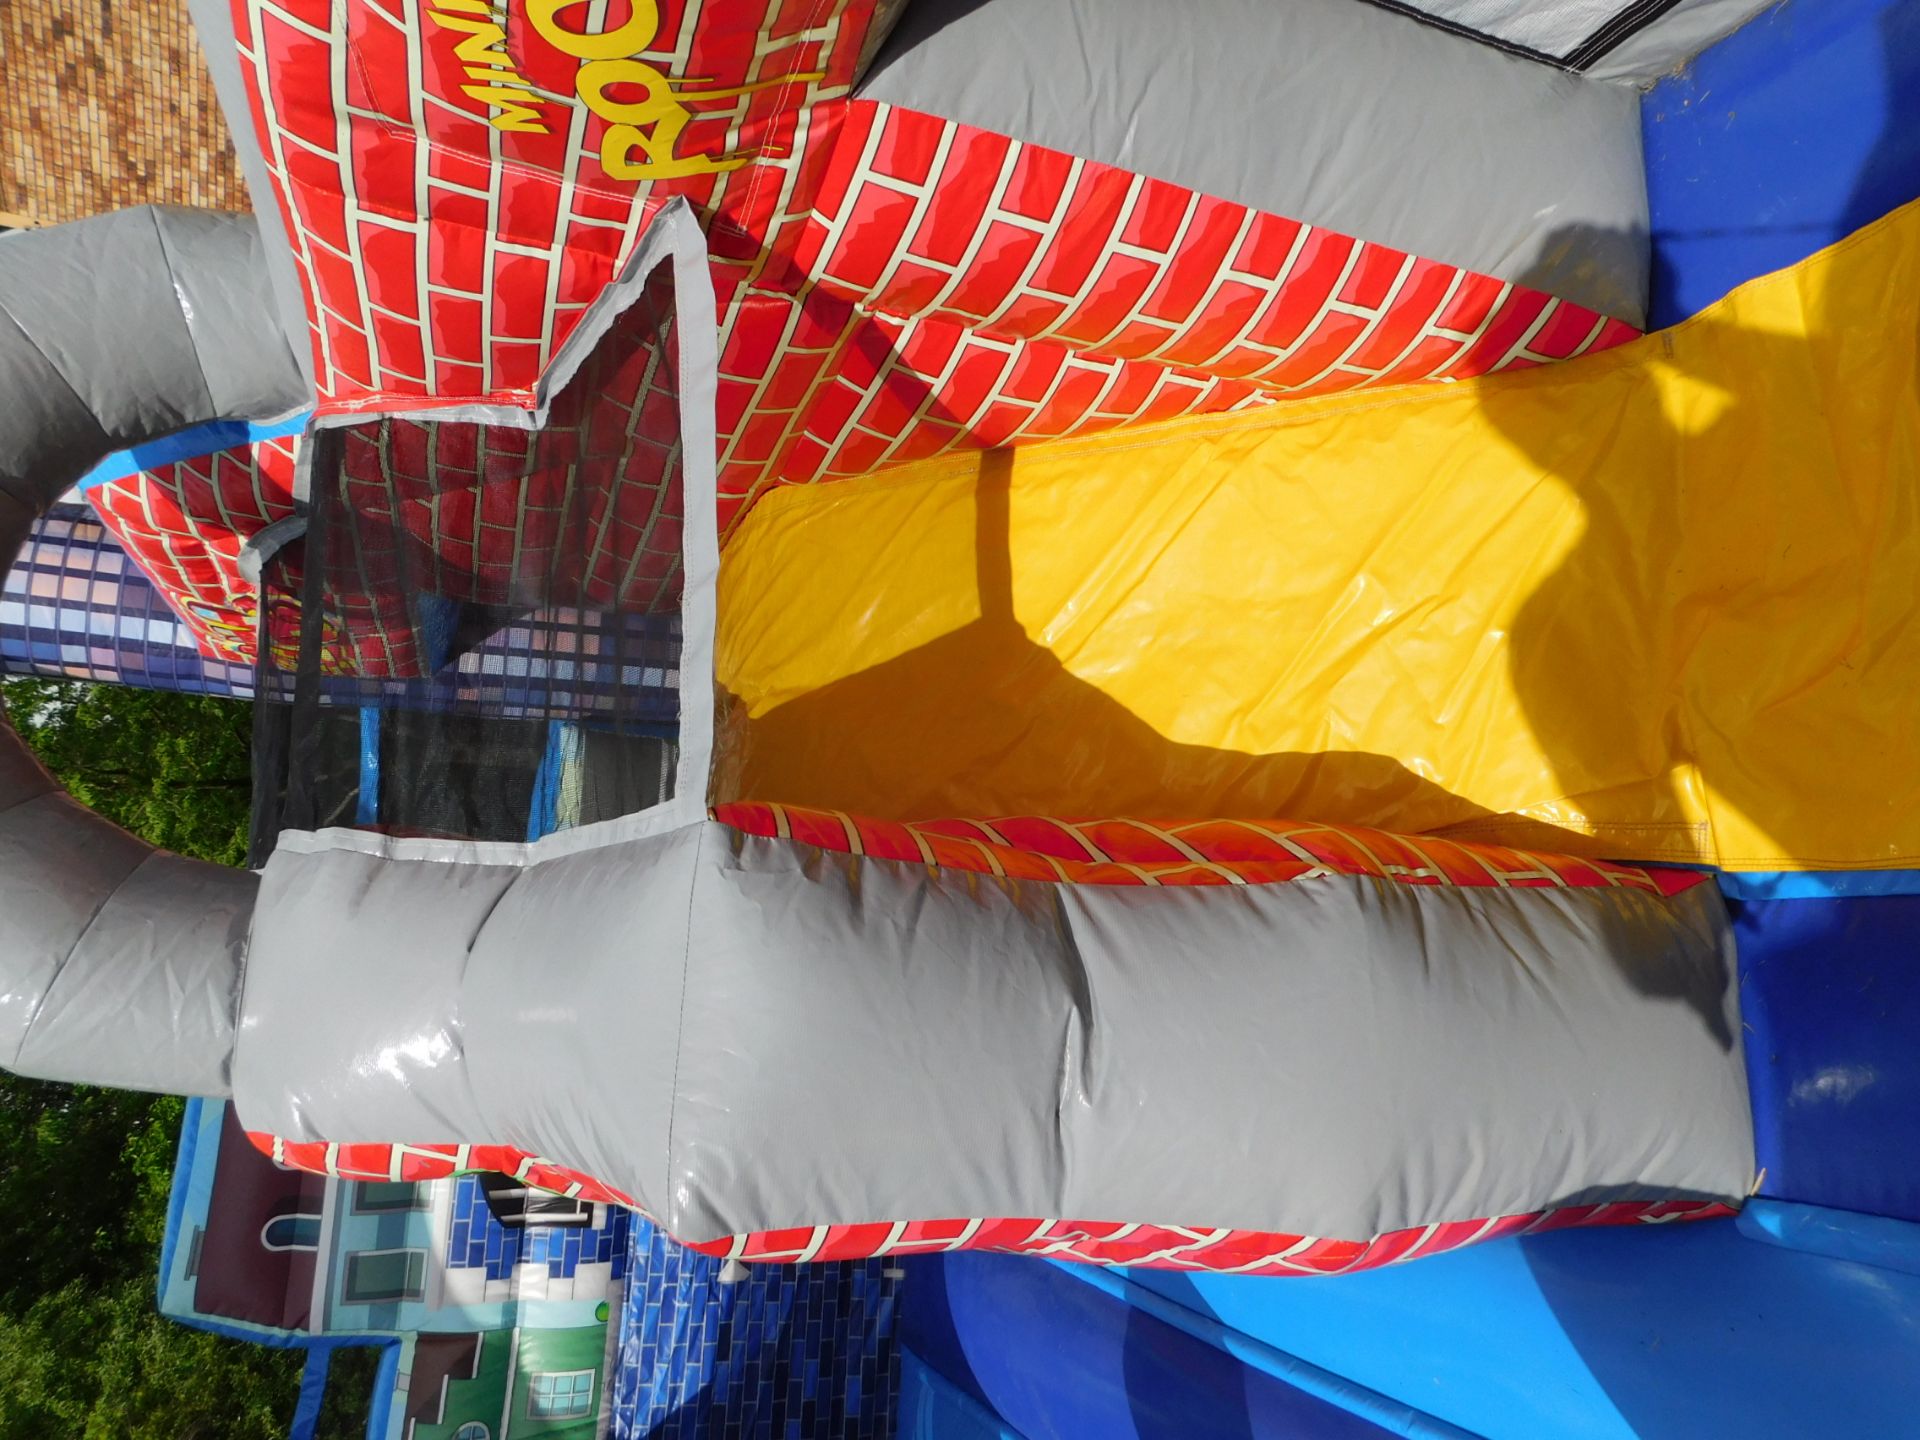 Eye Candy Mini City Inflatable Bounce House, 19'WX17'LX14'H, 2 Blowers req. - Image 17 of 22